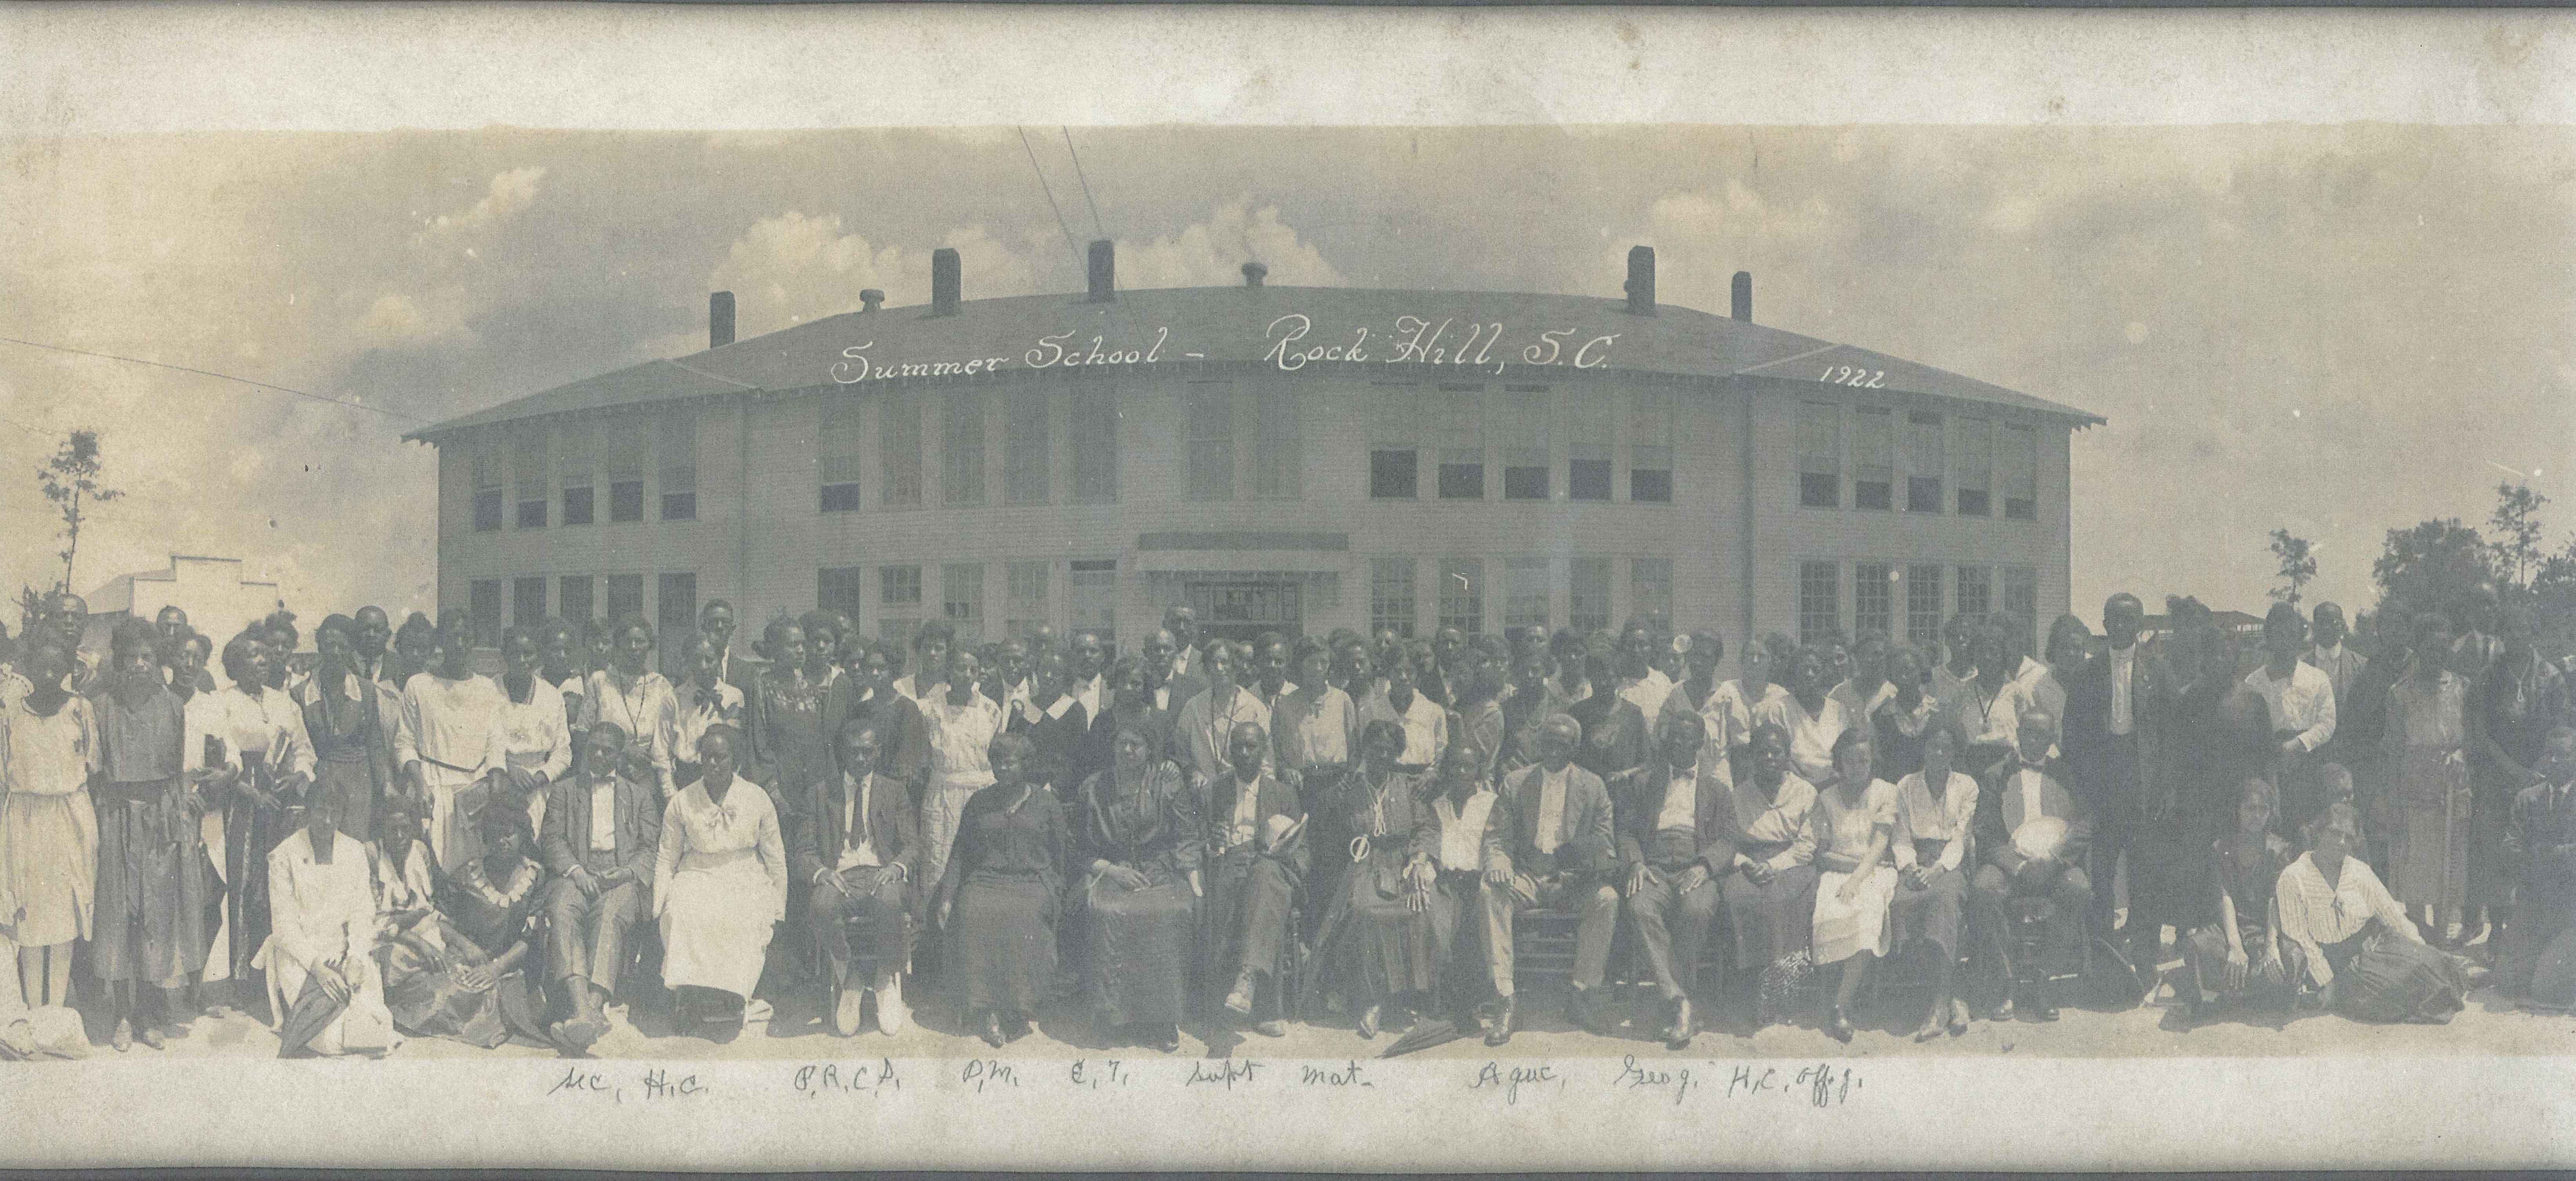 ENLARGED PANORAMIC VIEW OF THE SCHOOL - 1922